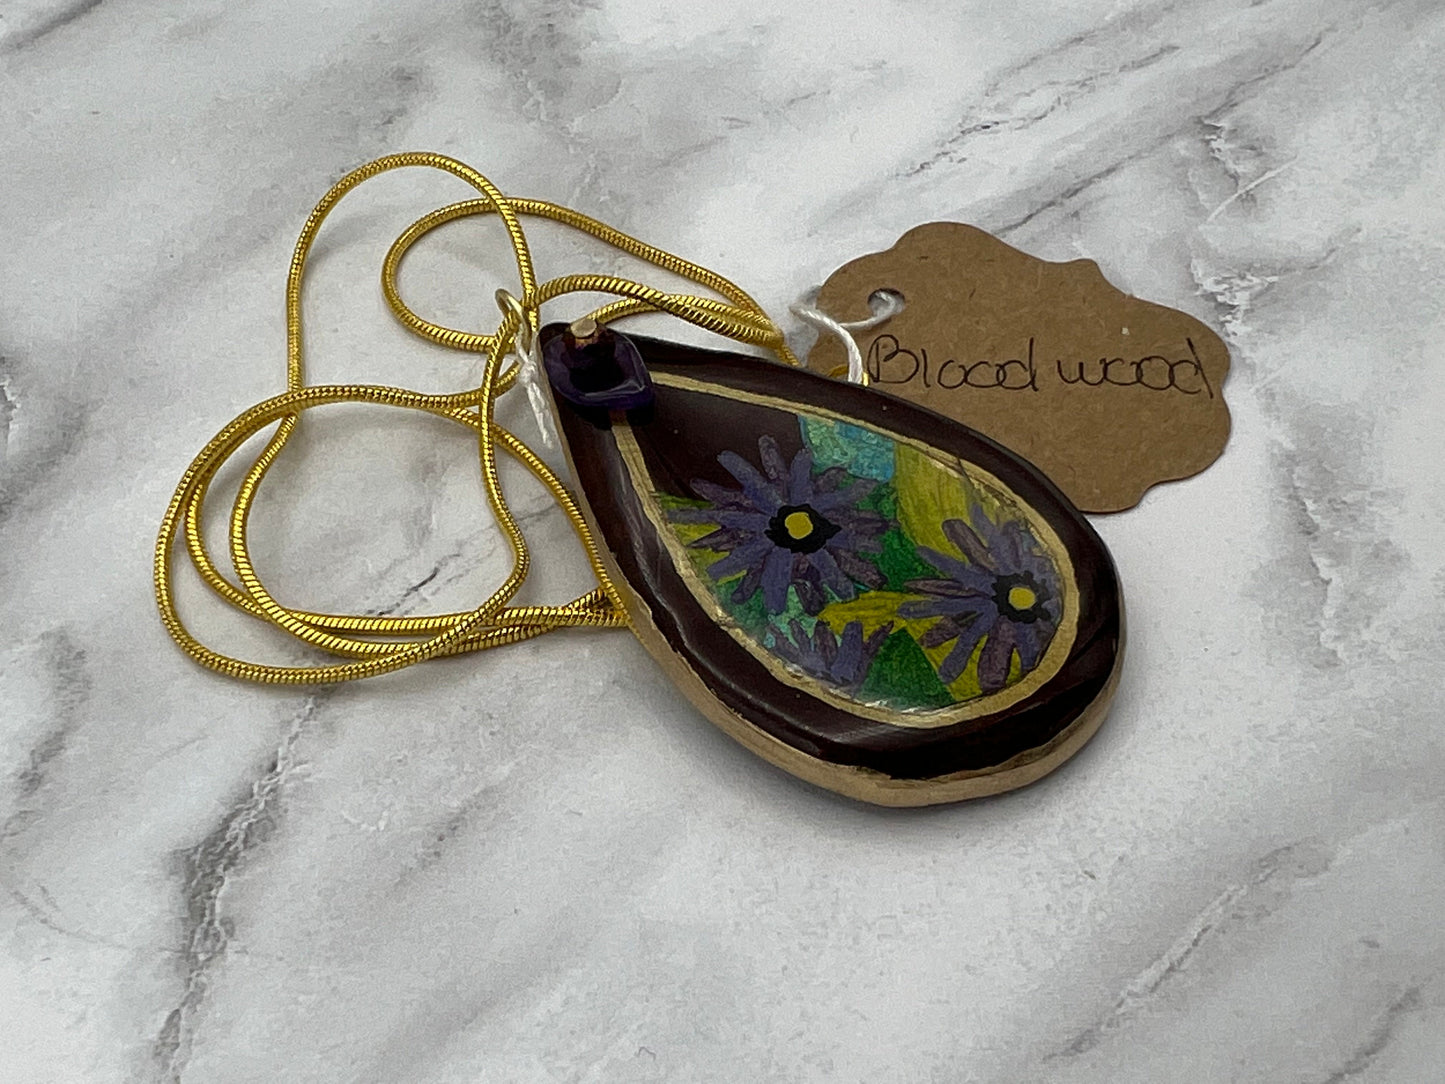 Violet Anemone on Bloodwood with Amethyst Accent - Wooden Pendant Necklace